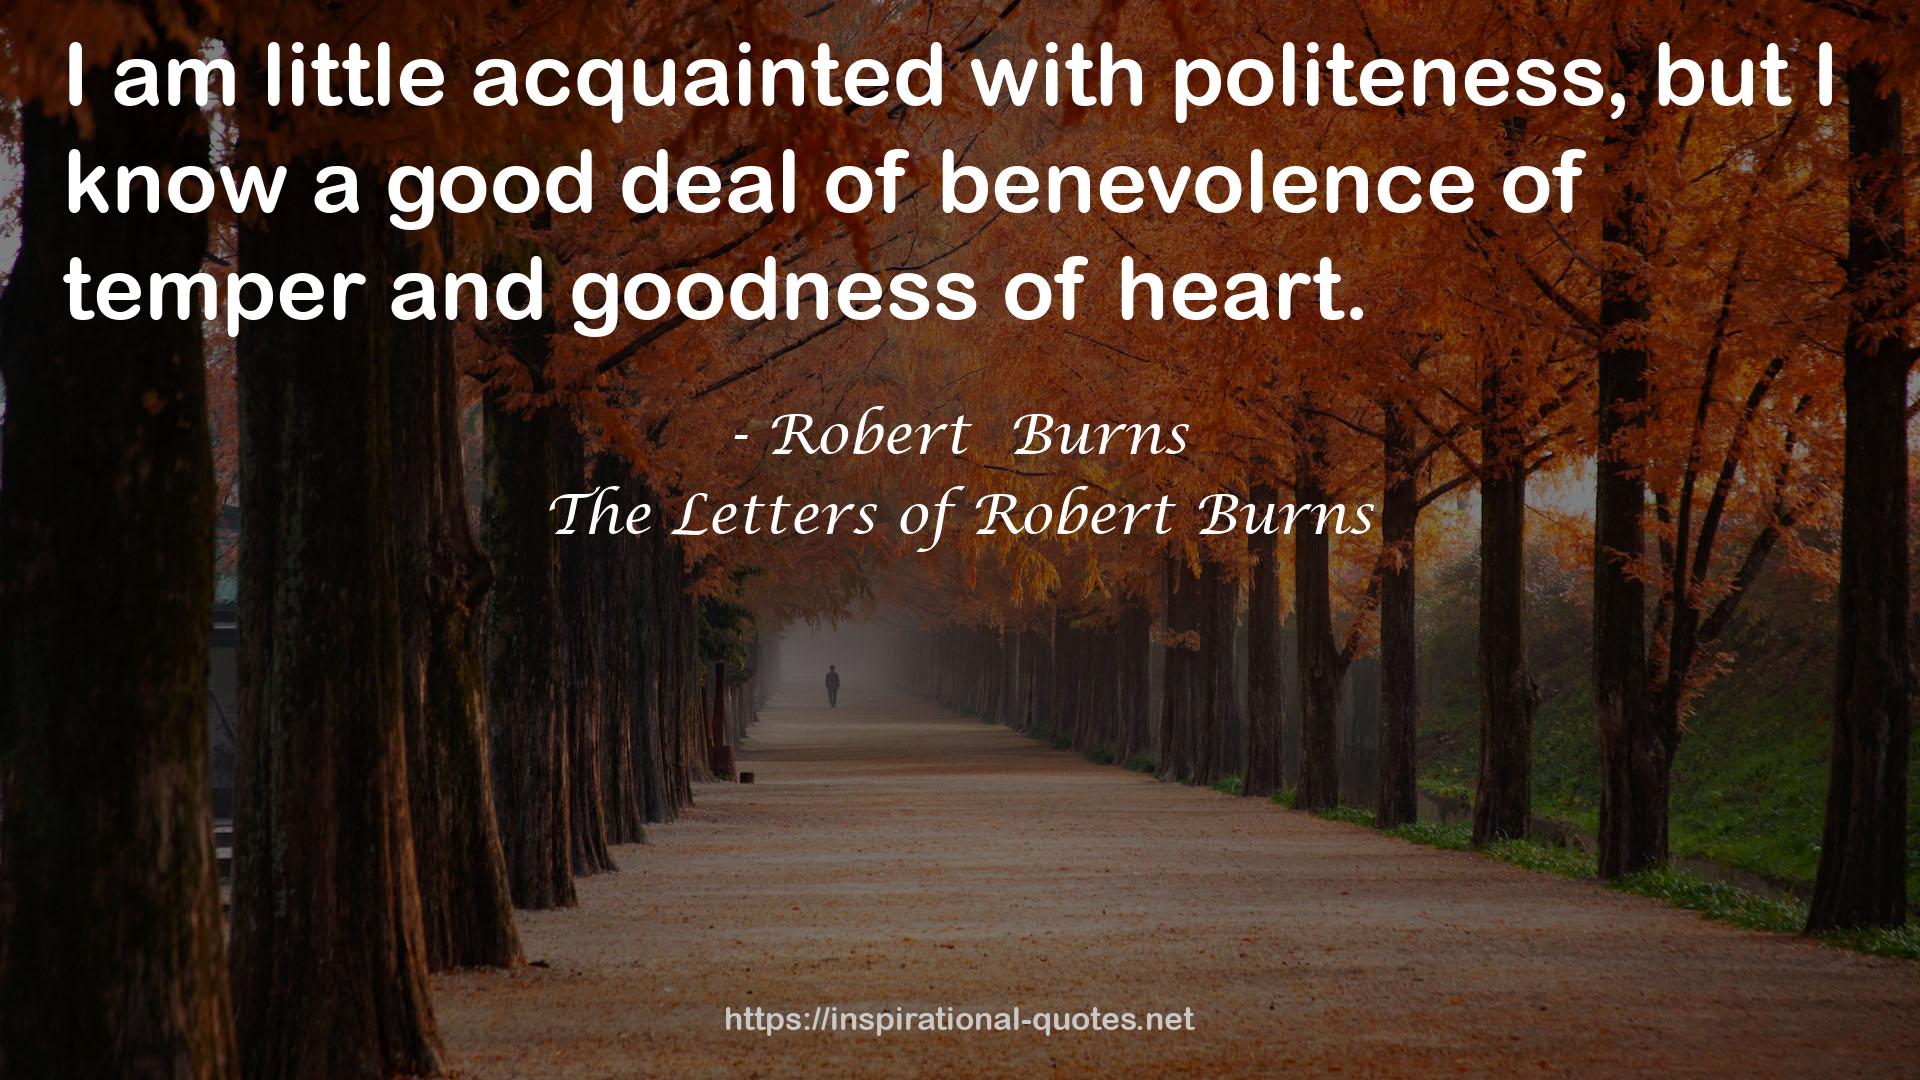 The Letters of Robert Burns QUOTES